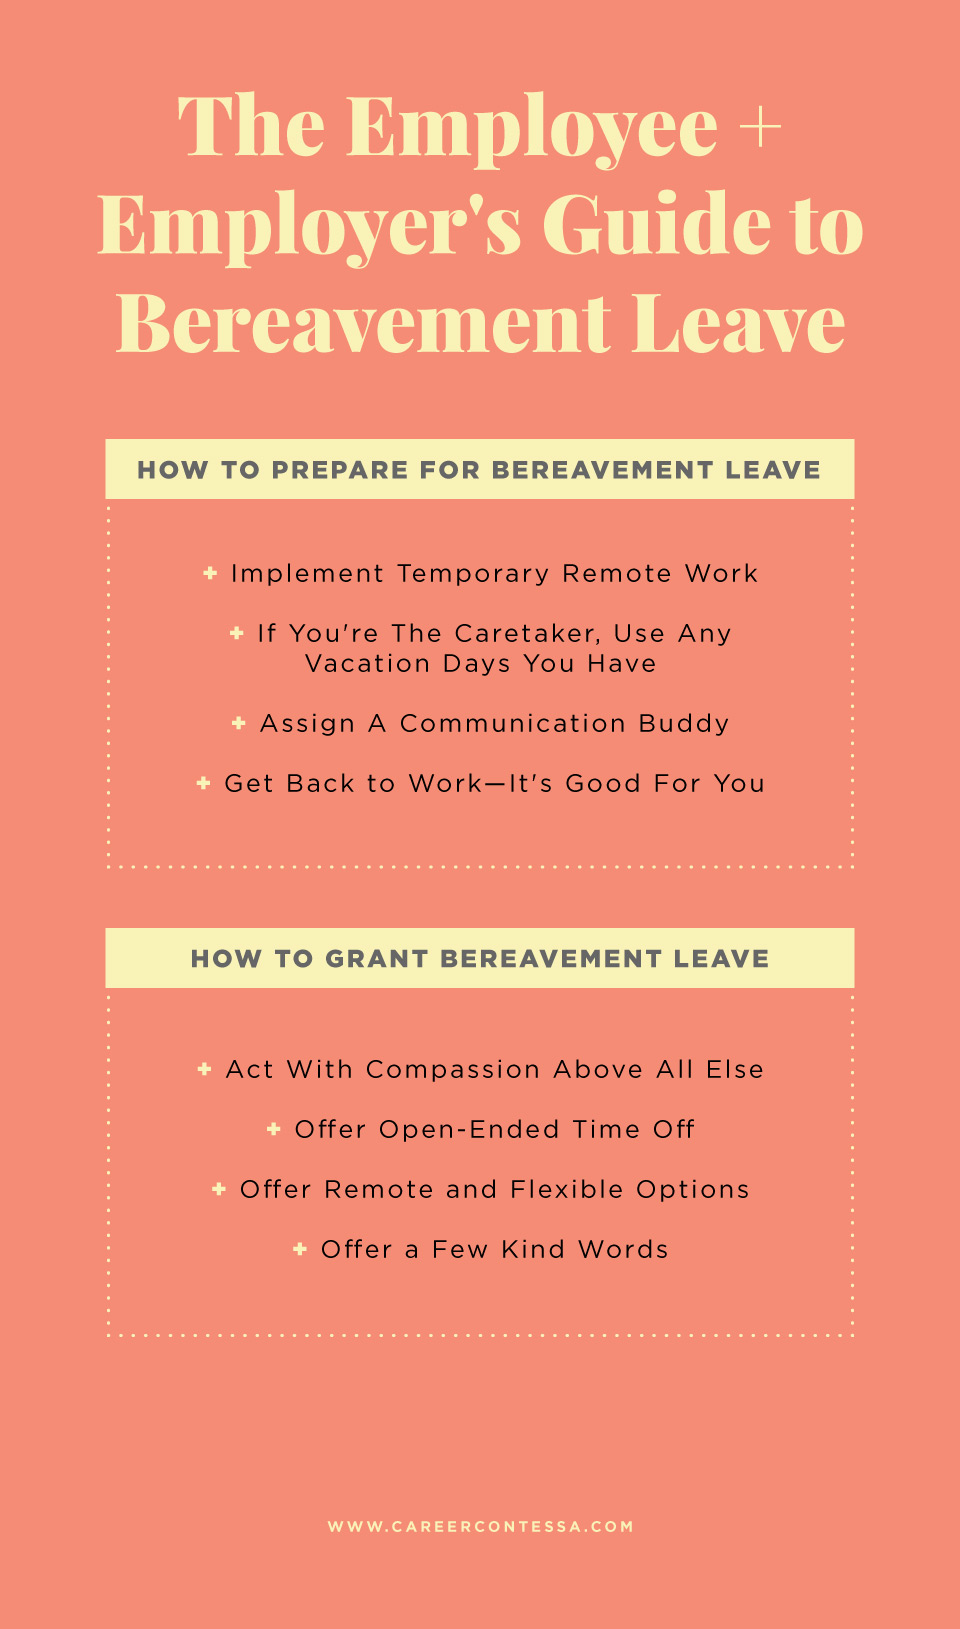 The Employee + Employer's Guide to Bereavement Leave Career Contessa